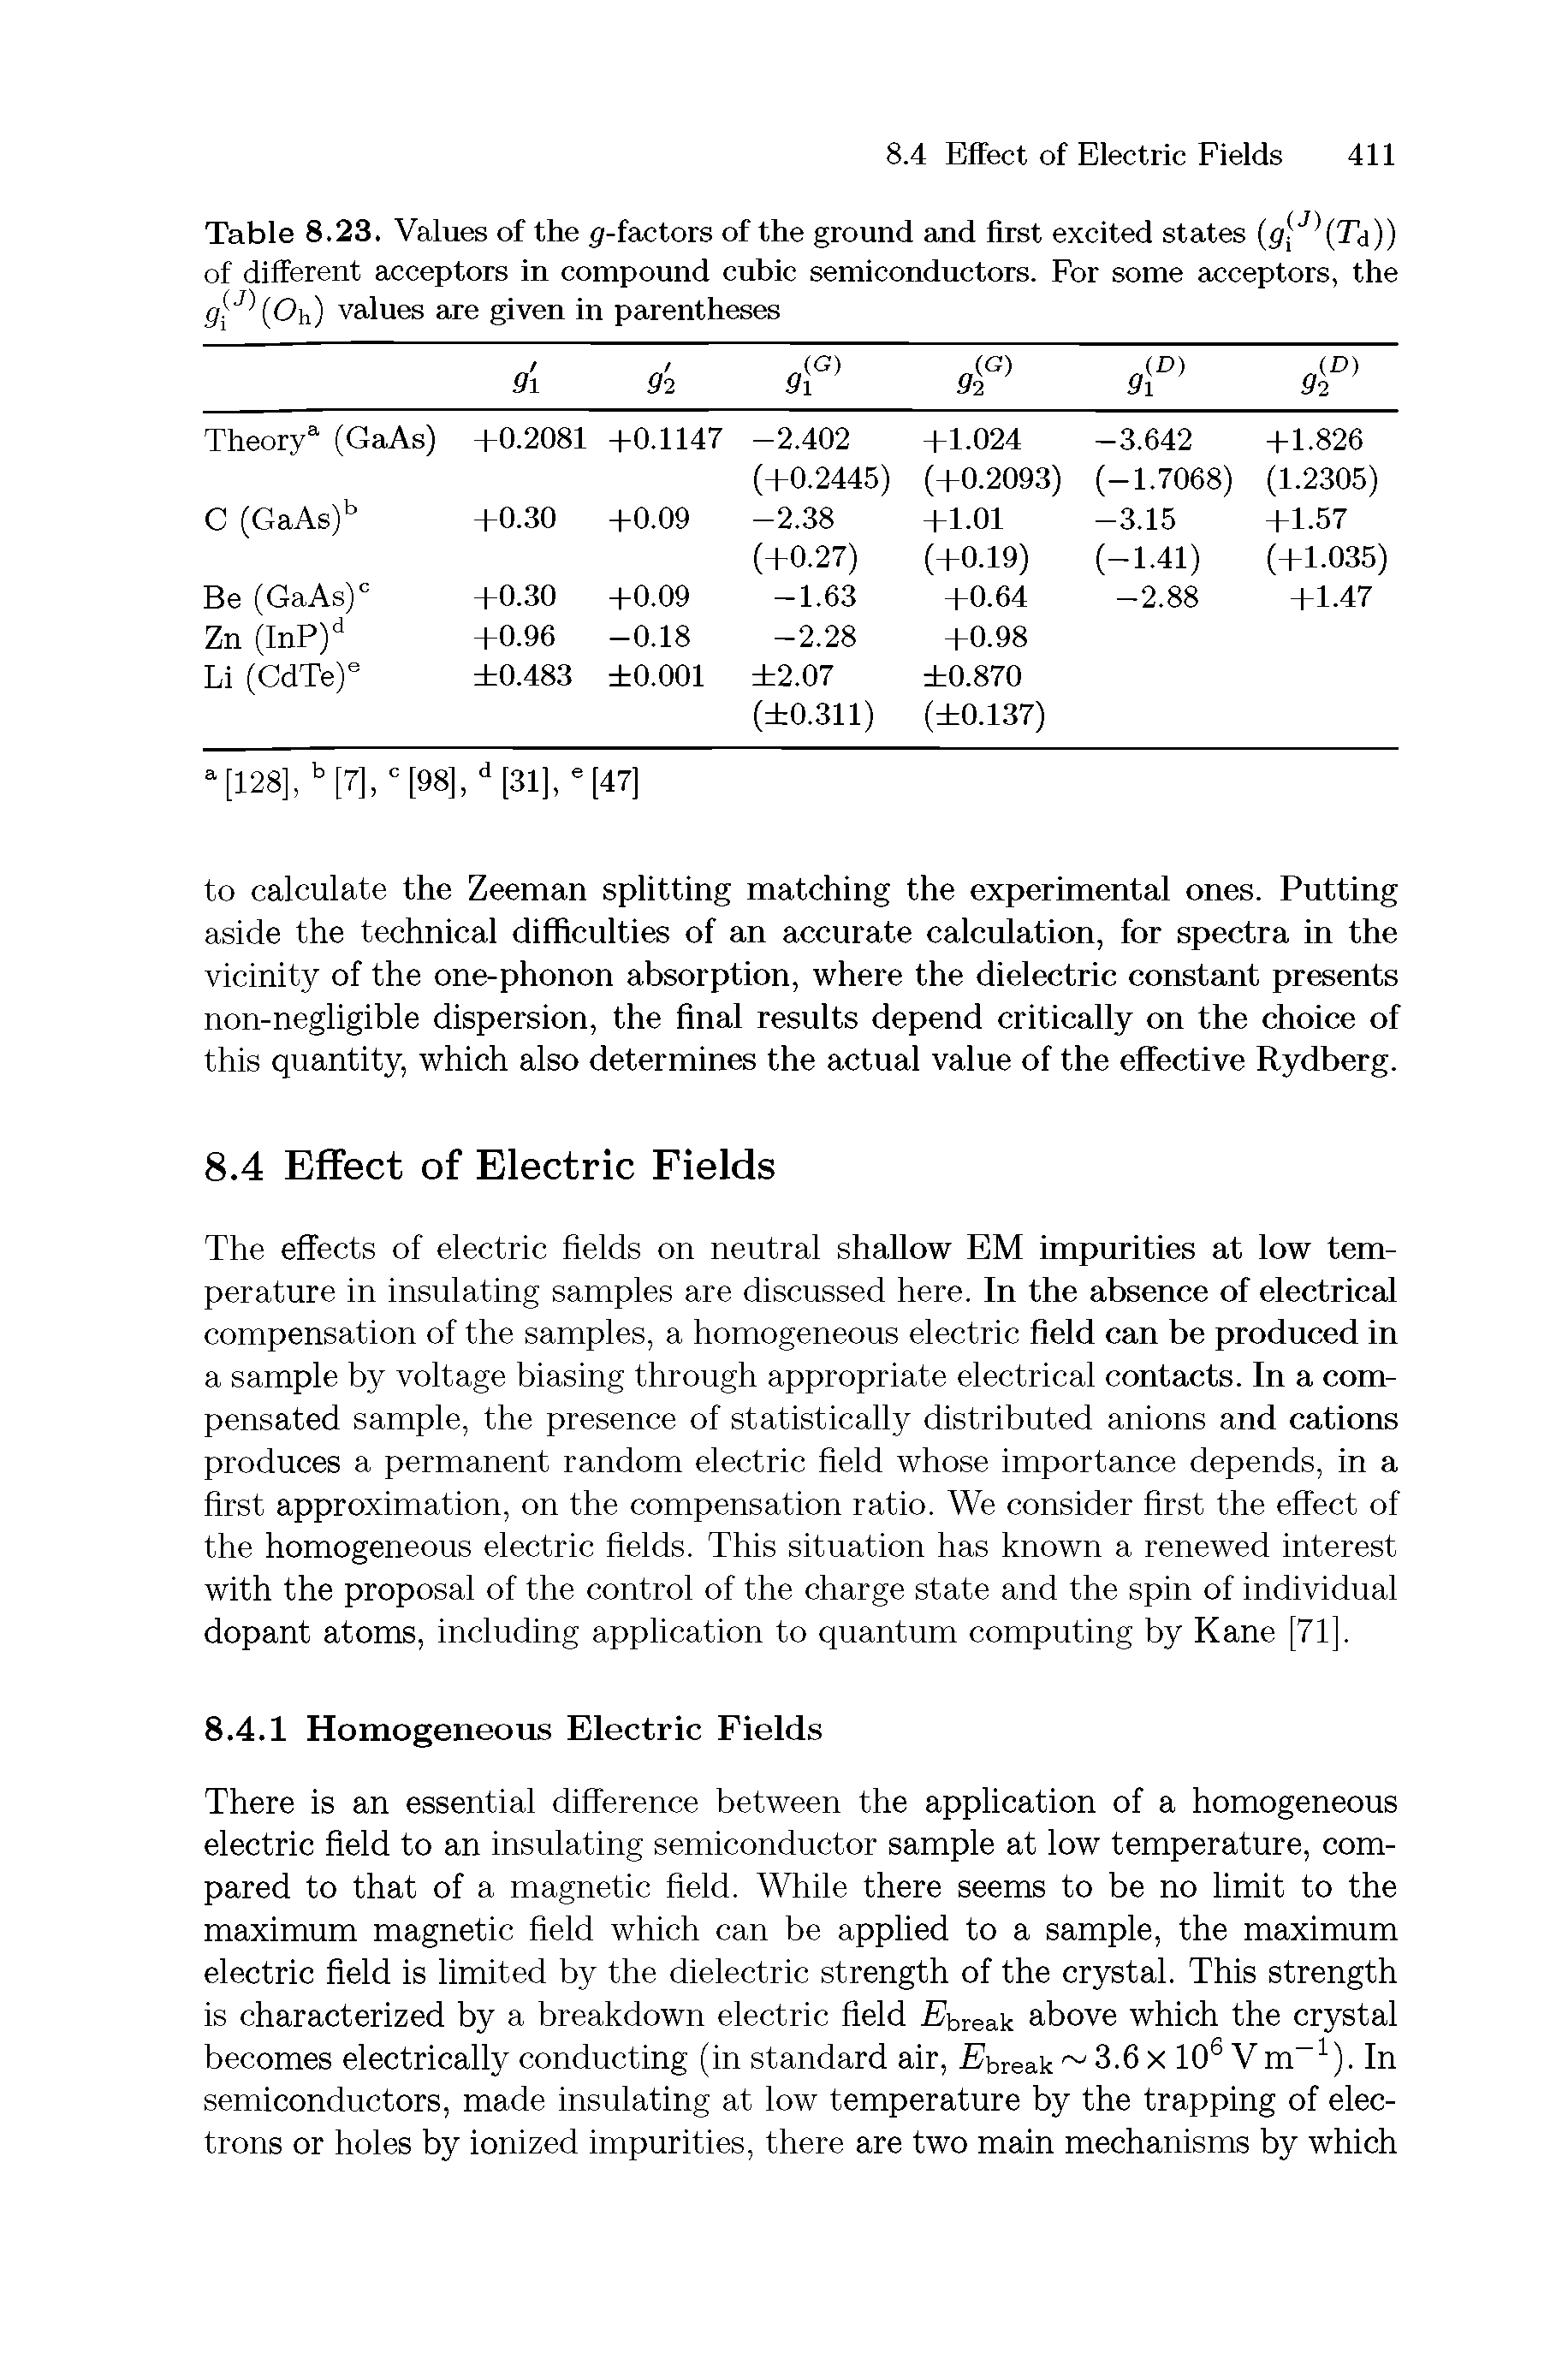 Table 8.23. Values of the (/-factors of the ground and first excited states (g J) (Tr )) of different acceptors in compound cubic semiconductors. For some acceptors, the g[J Oh) values are given in parentheses...